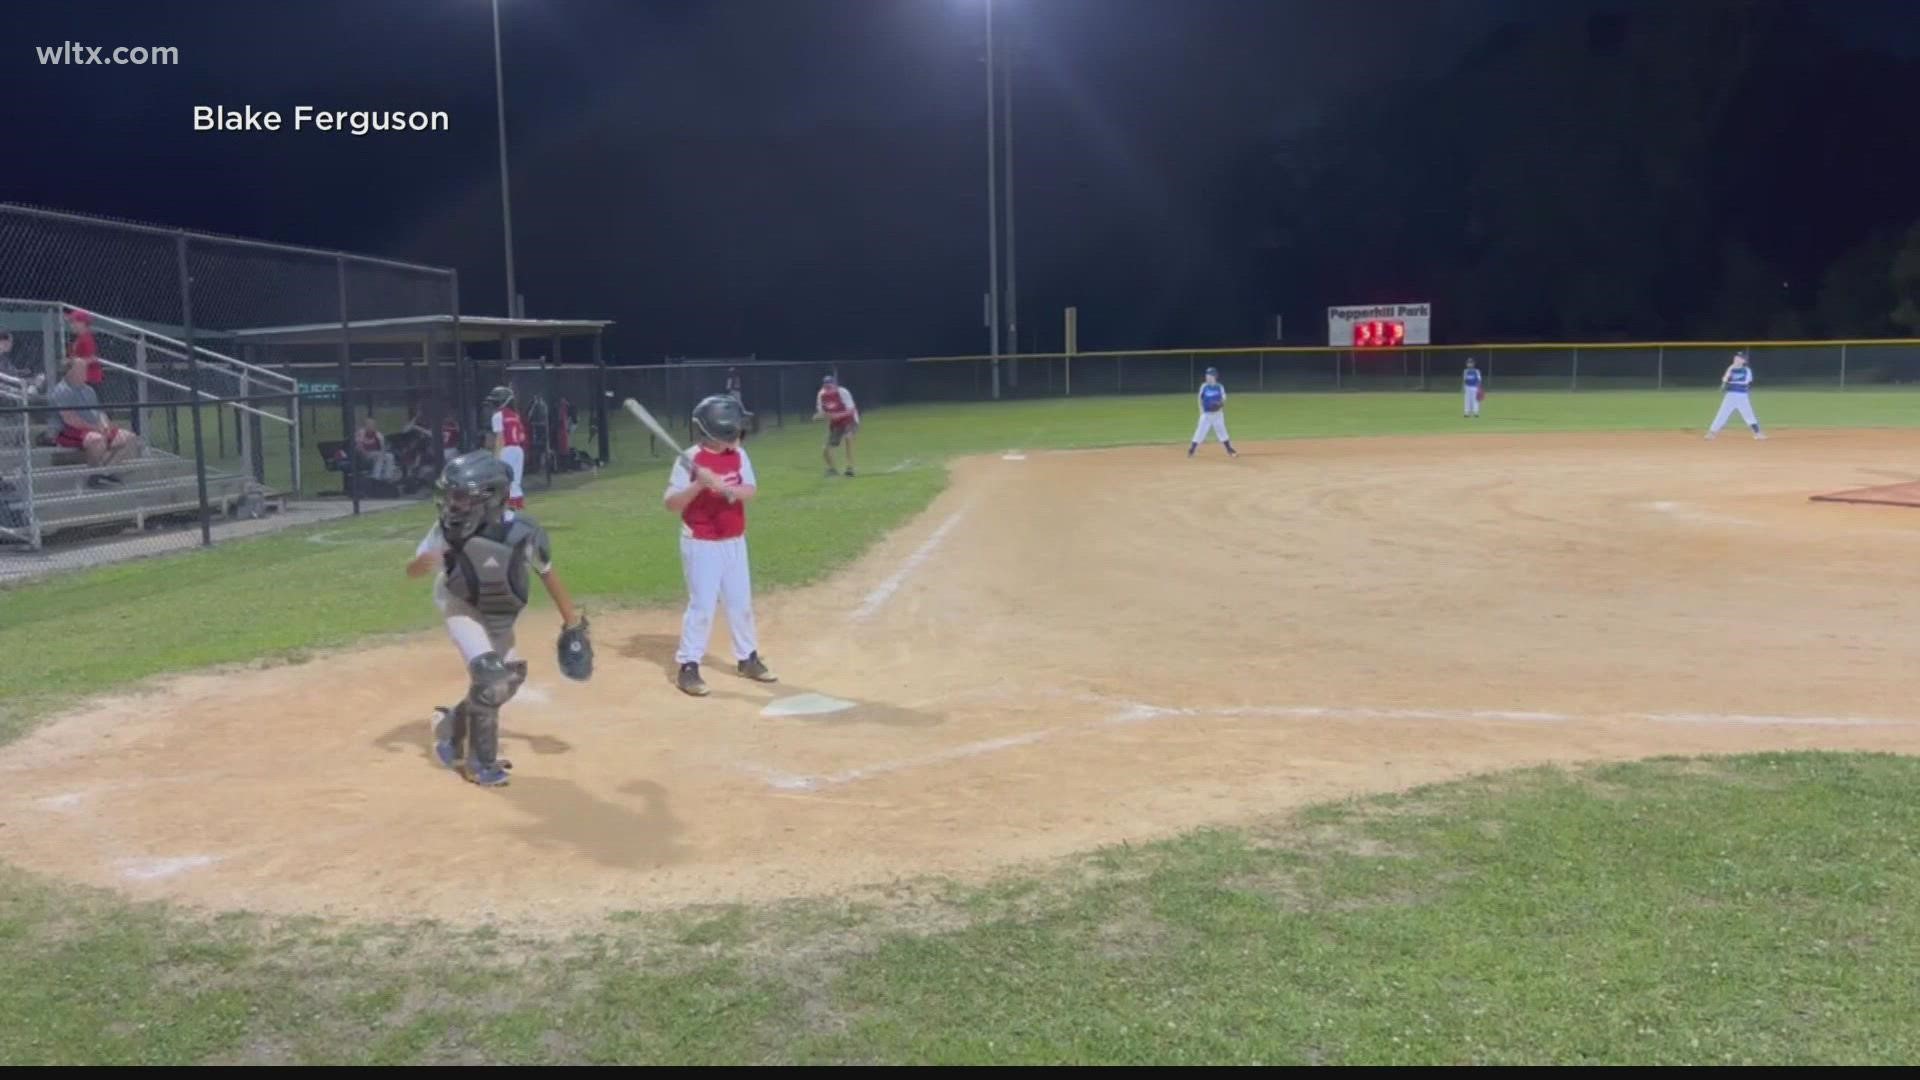 Players and spectators at a North Charleston youth baseball game were sent running for cover when gunshots rang out from a nearby parking lot.